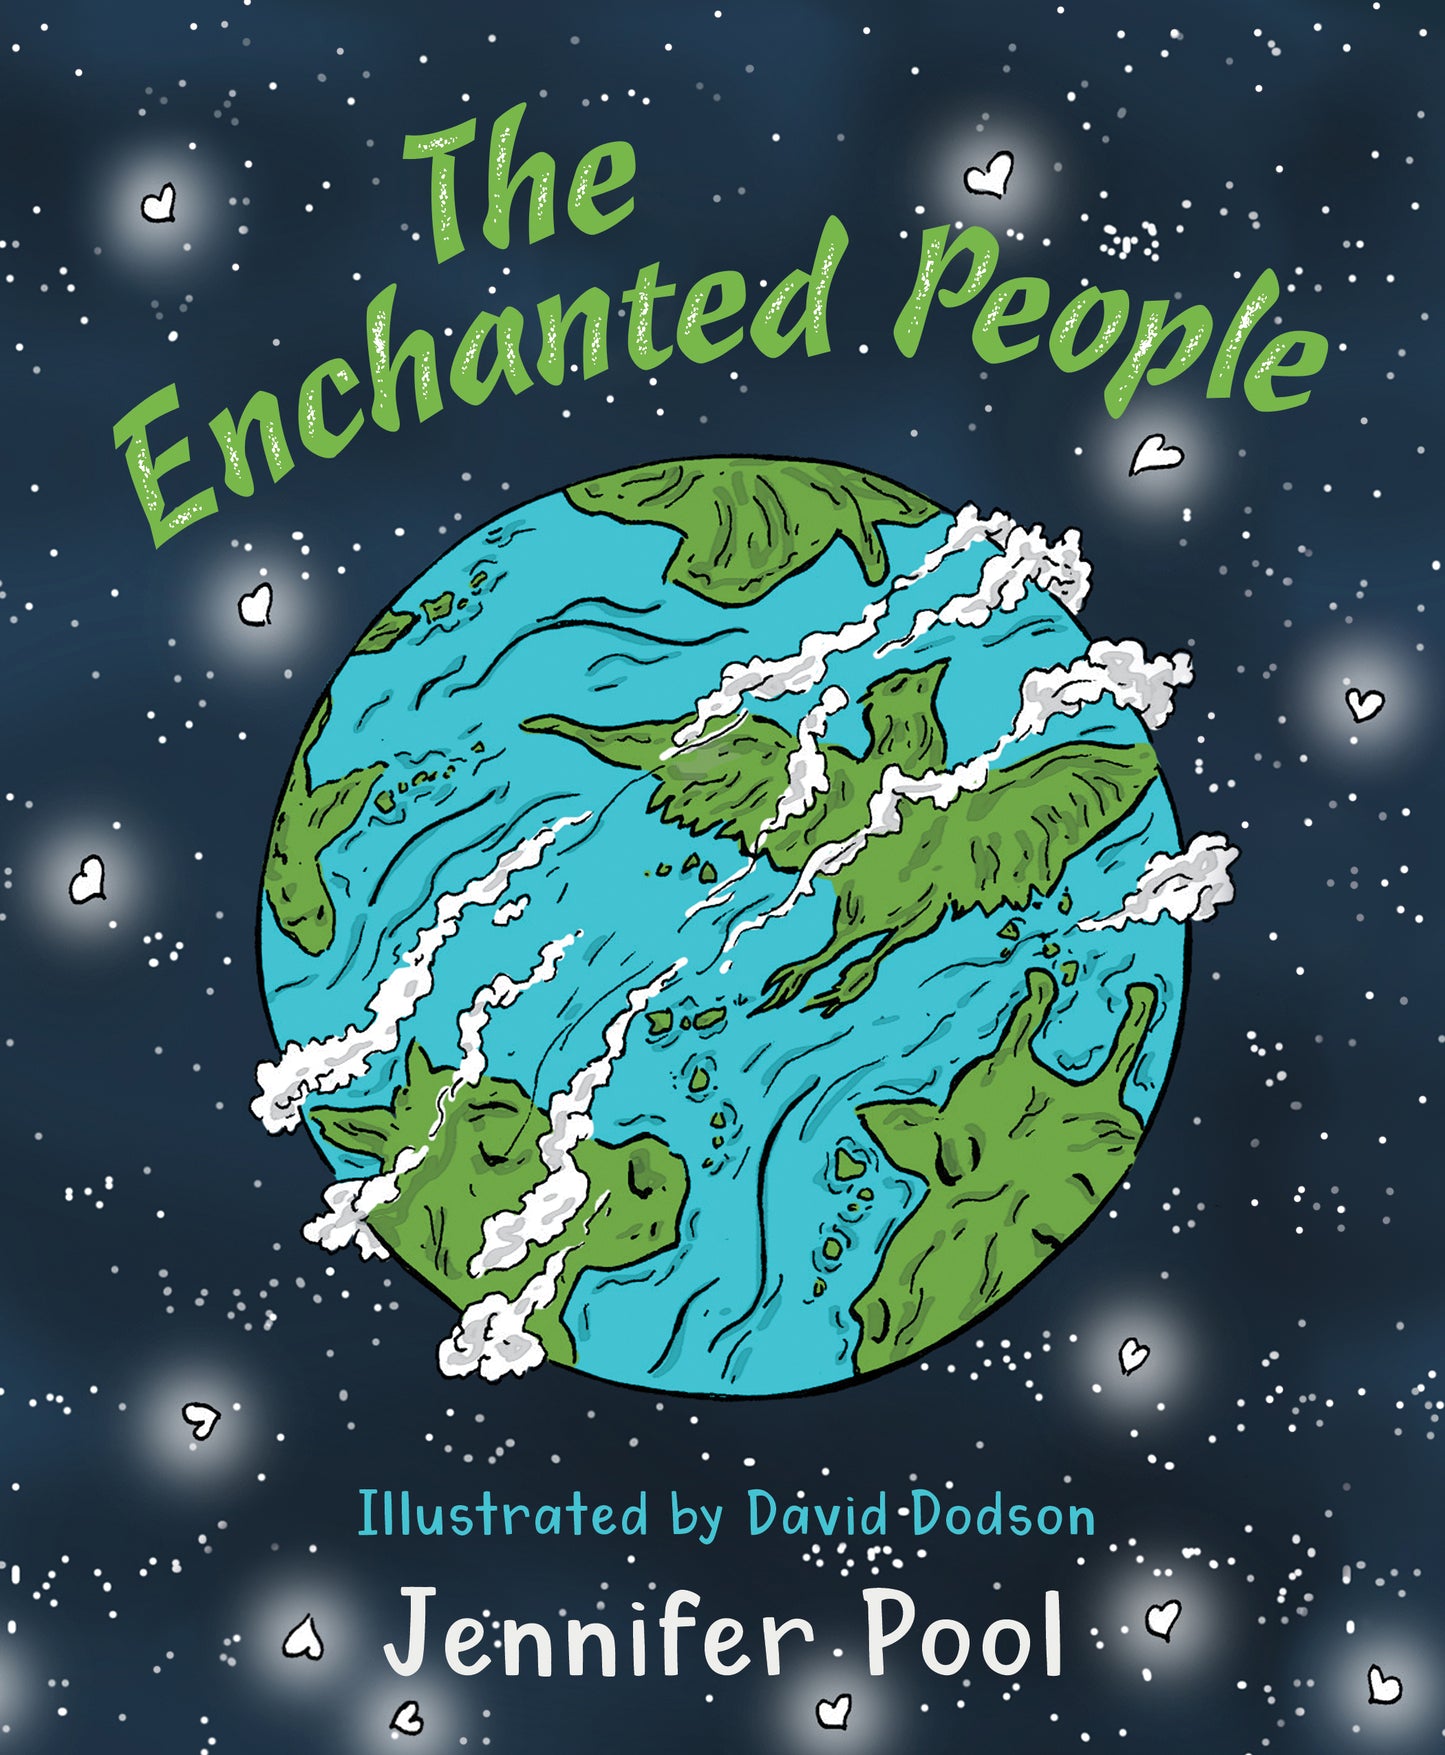 The Enchanted People